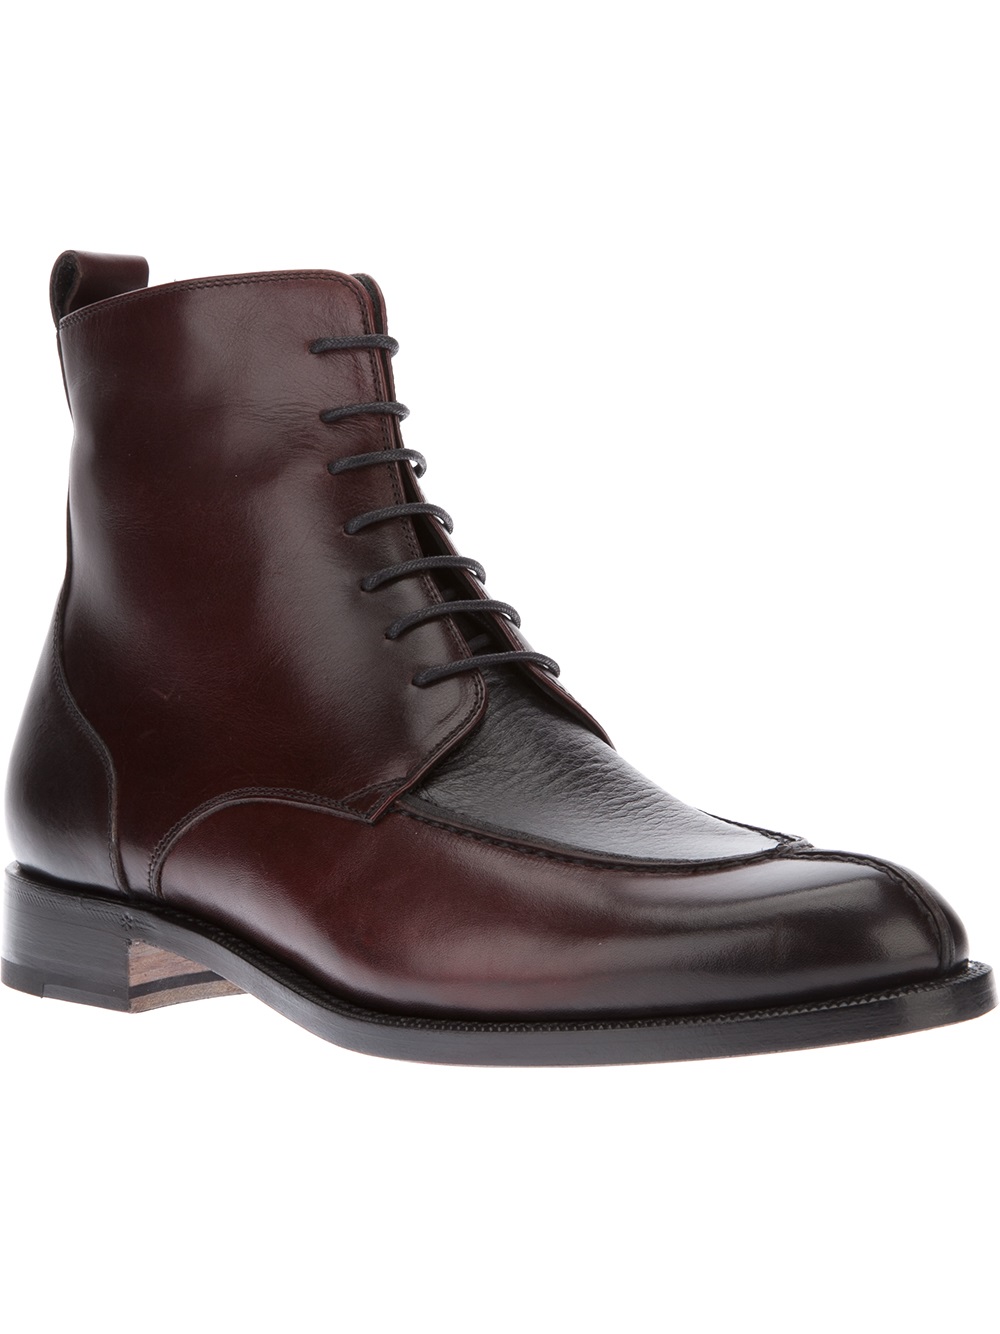 Lyst - Bruno Magli Laceup Ankle Boot in Brown for Men